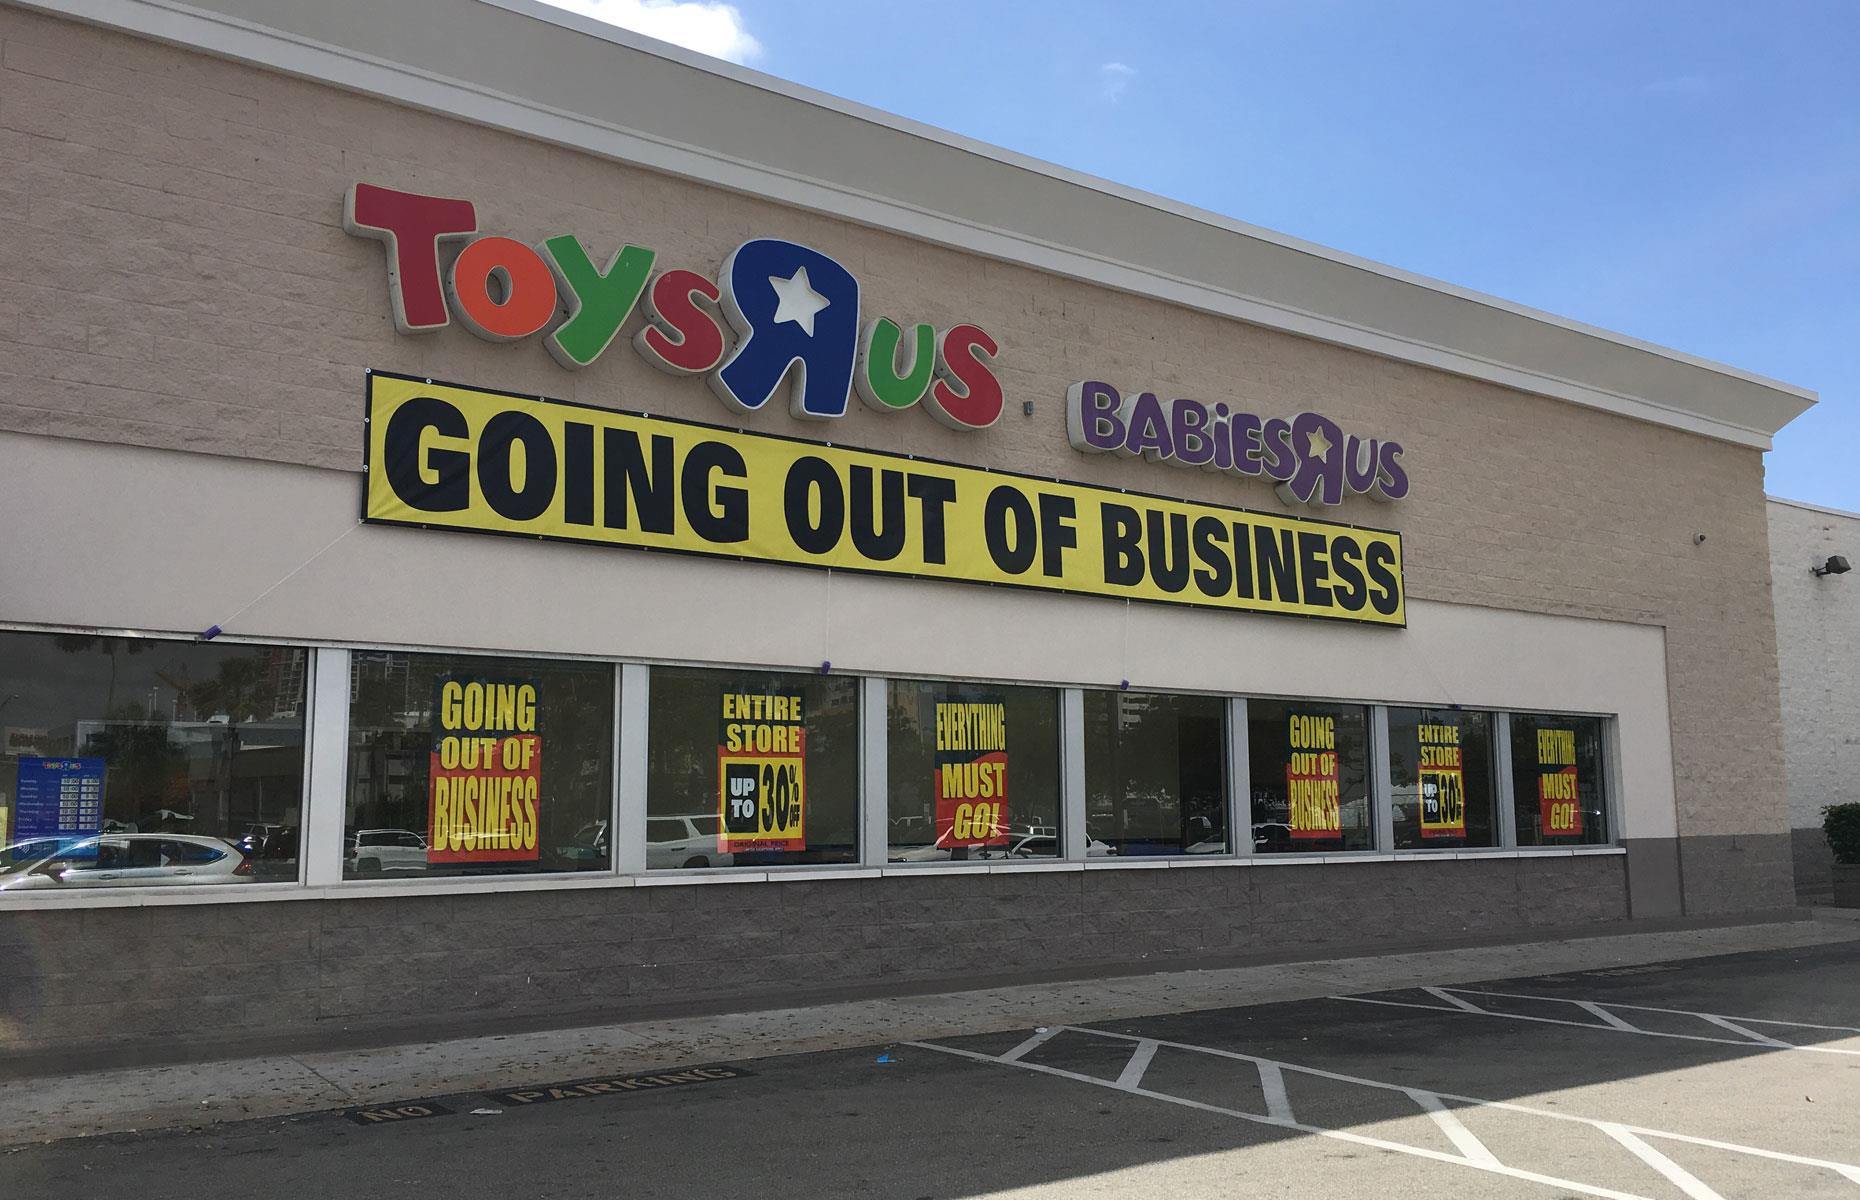 Toys “R” Us: 735 stores